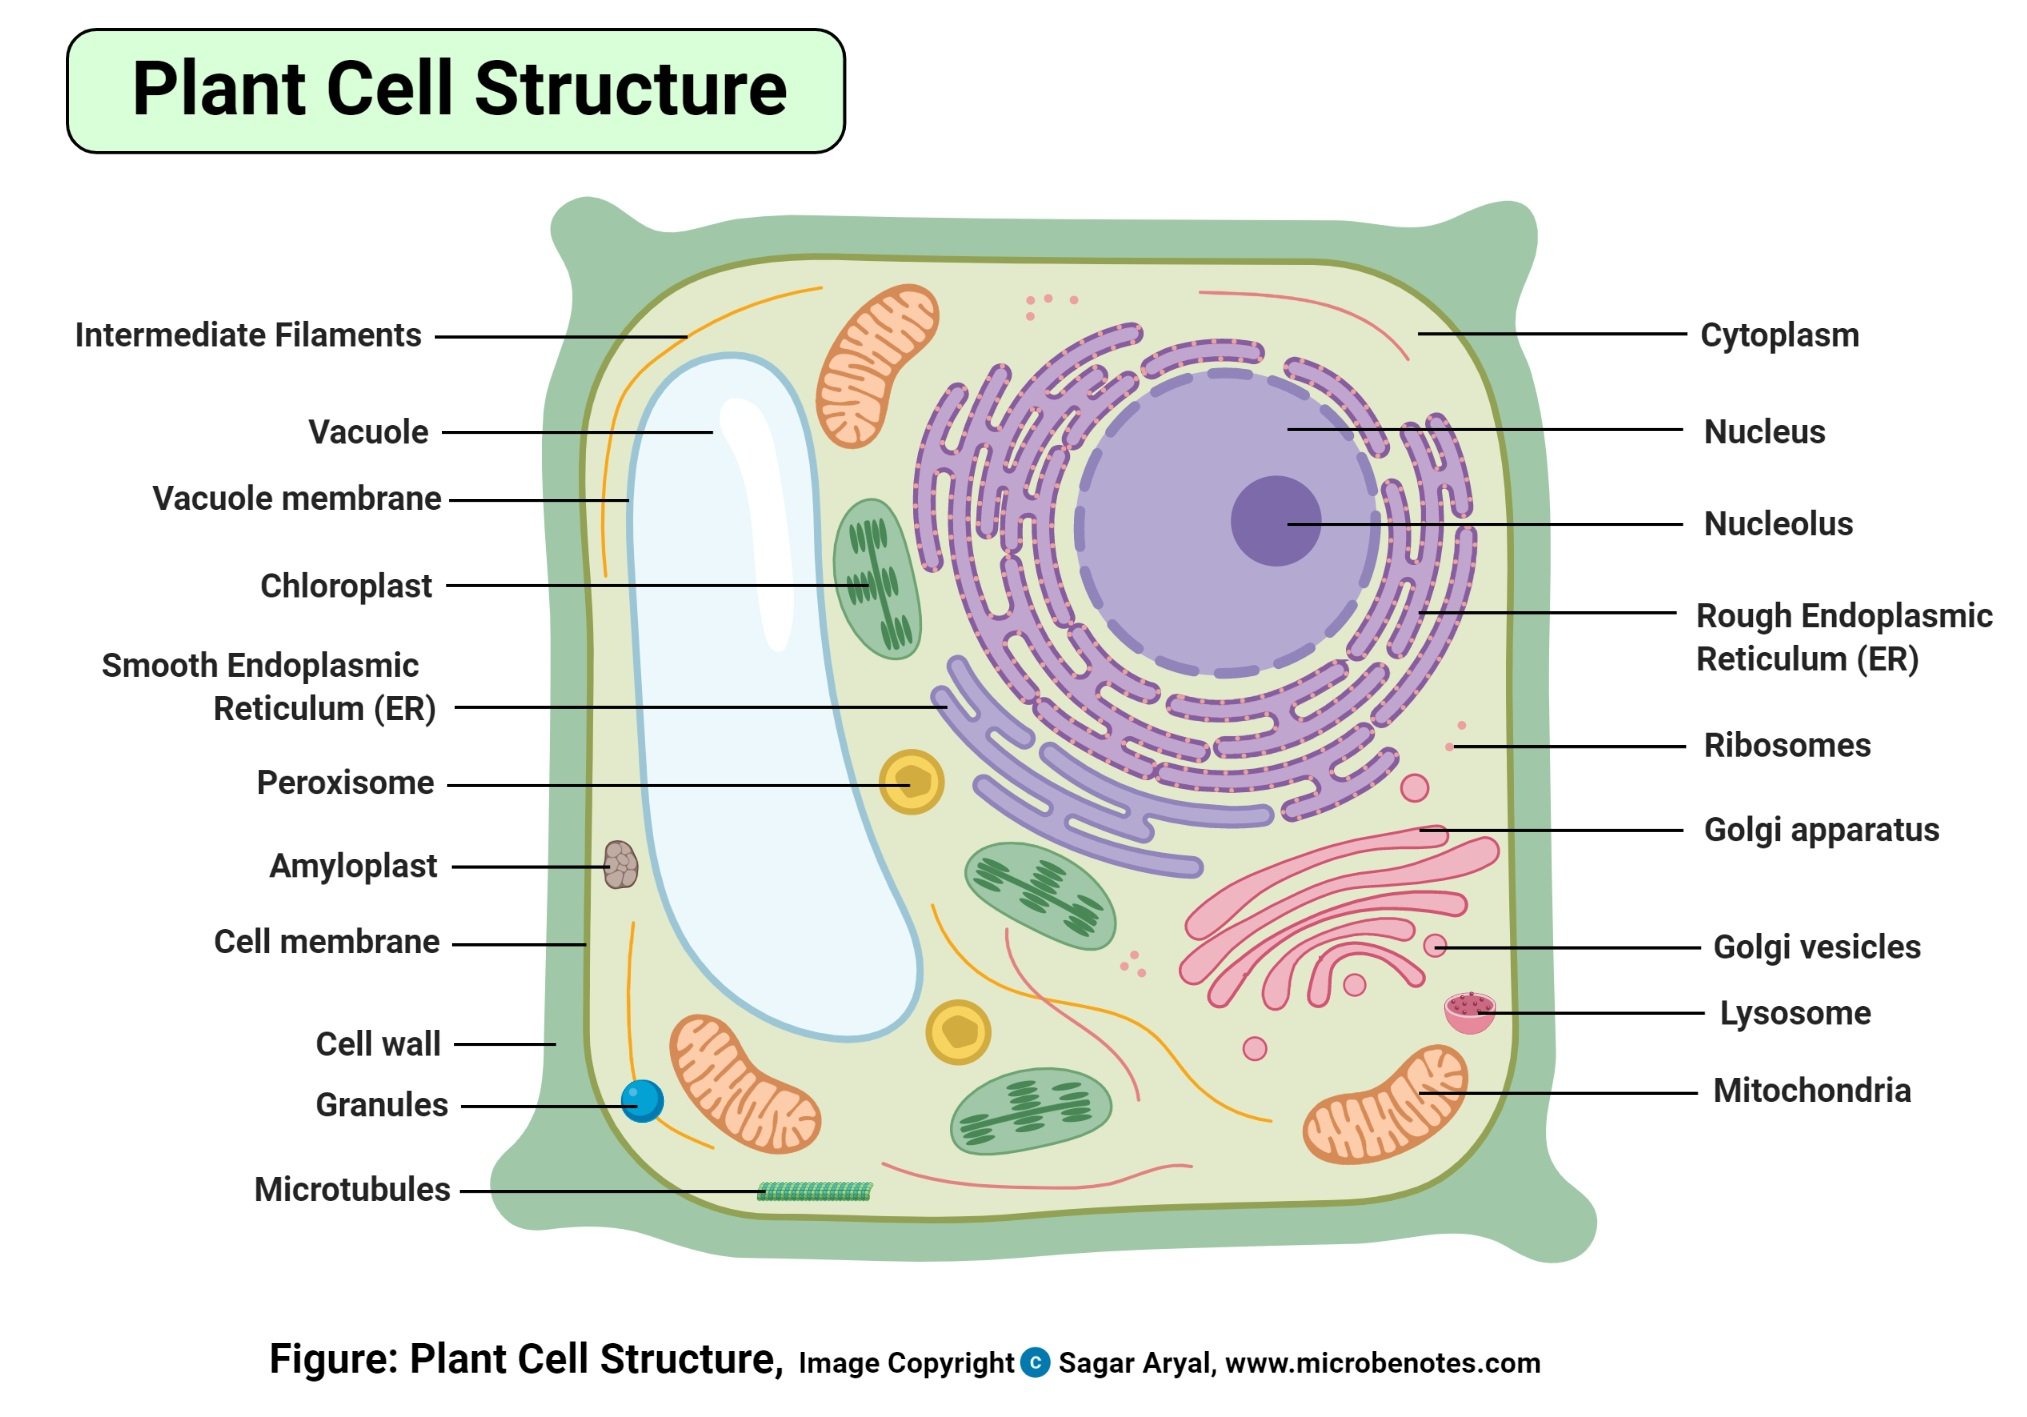 Structure of Plant cell